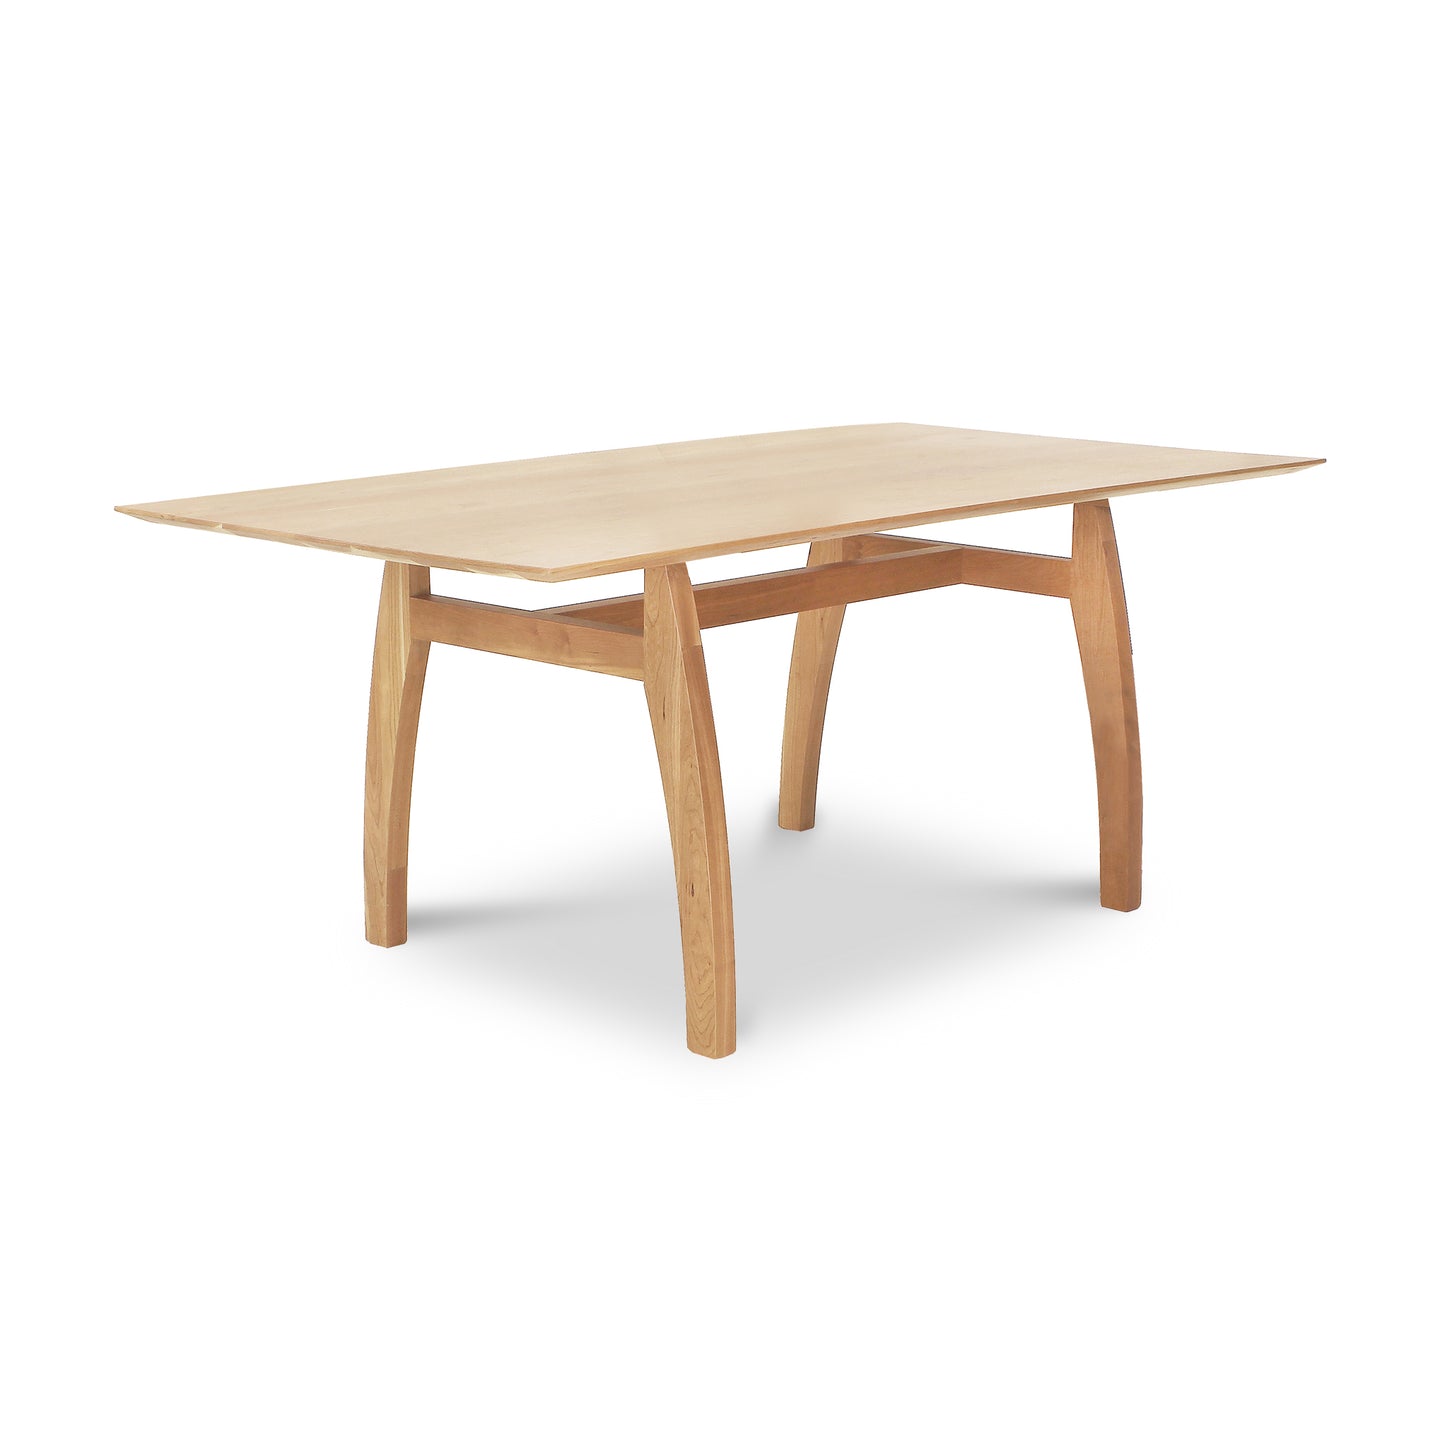 A high-end Vermont Modern Solid Top Trestle Table with solid top and legs by Lyndon Furniture.